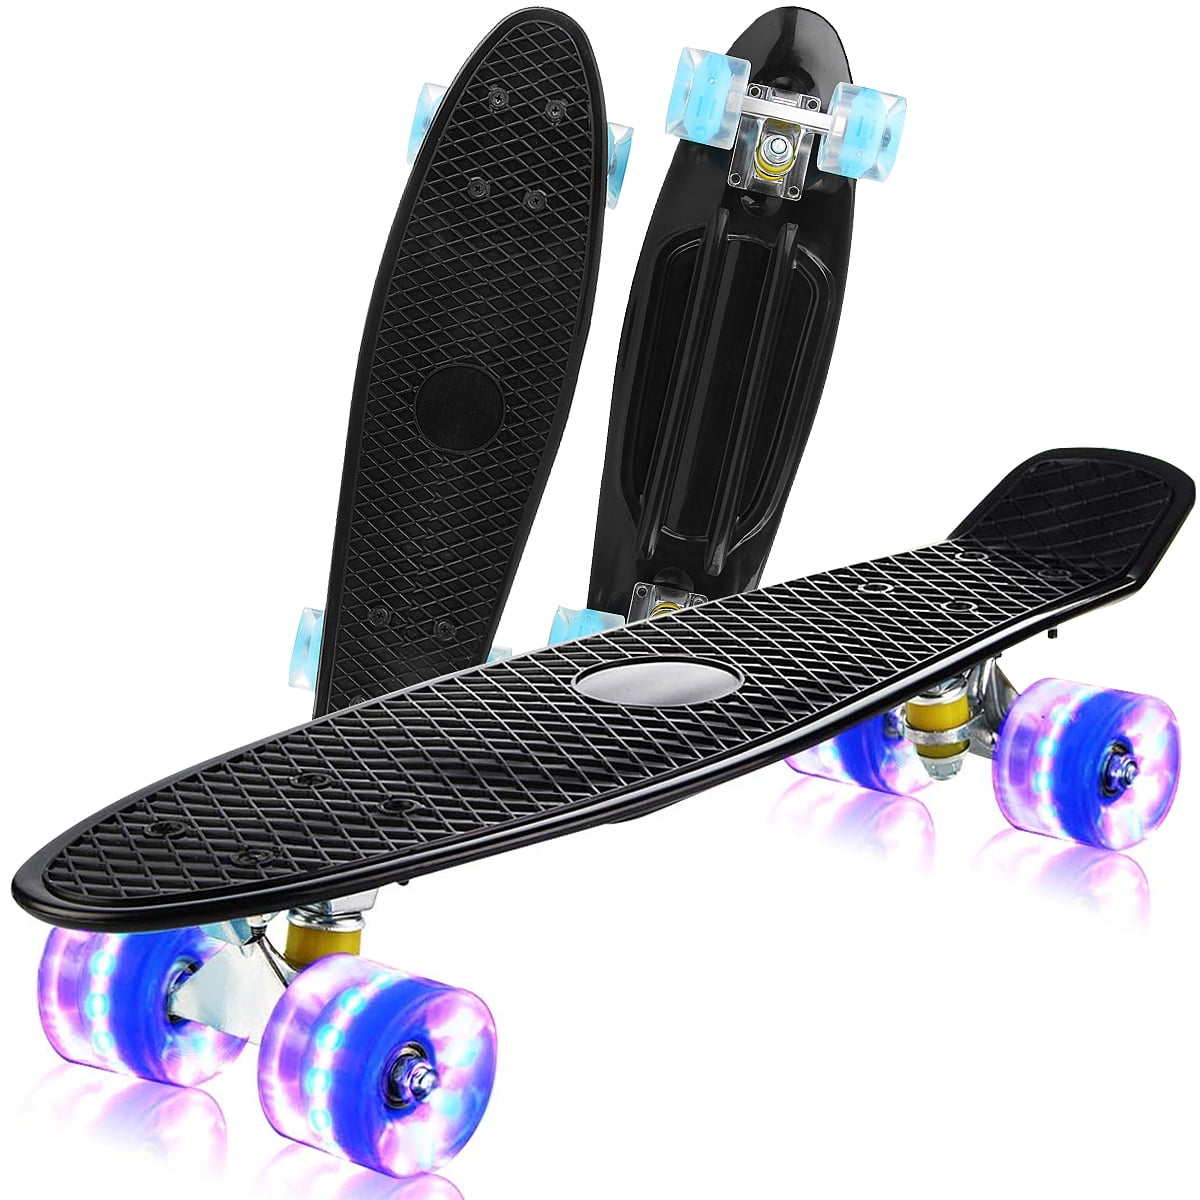 Details about   22 Inch Complete Mini Cruiser Skateboard with LED Light Up Wheels for kids c 51 